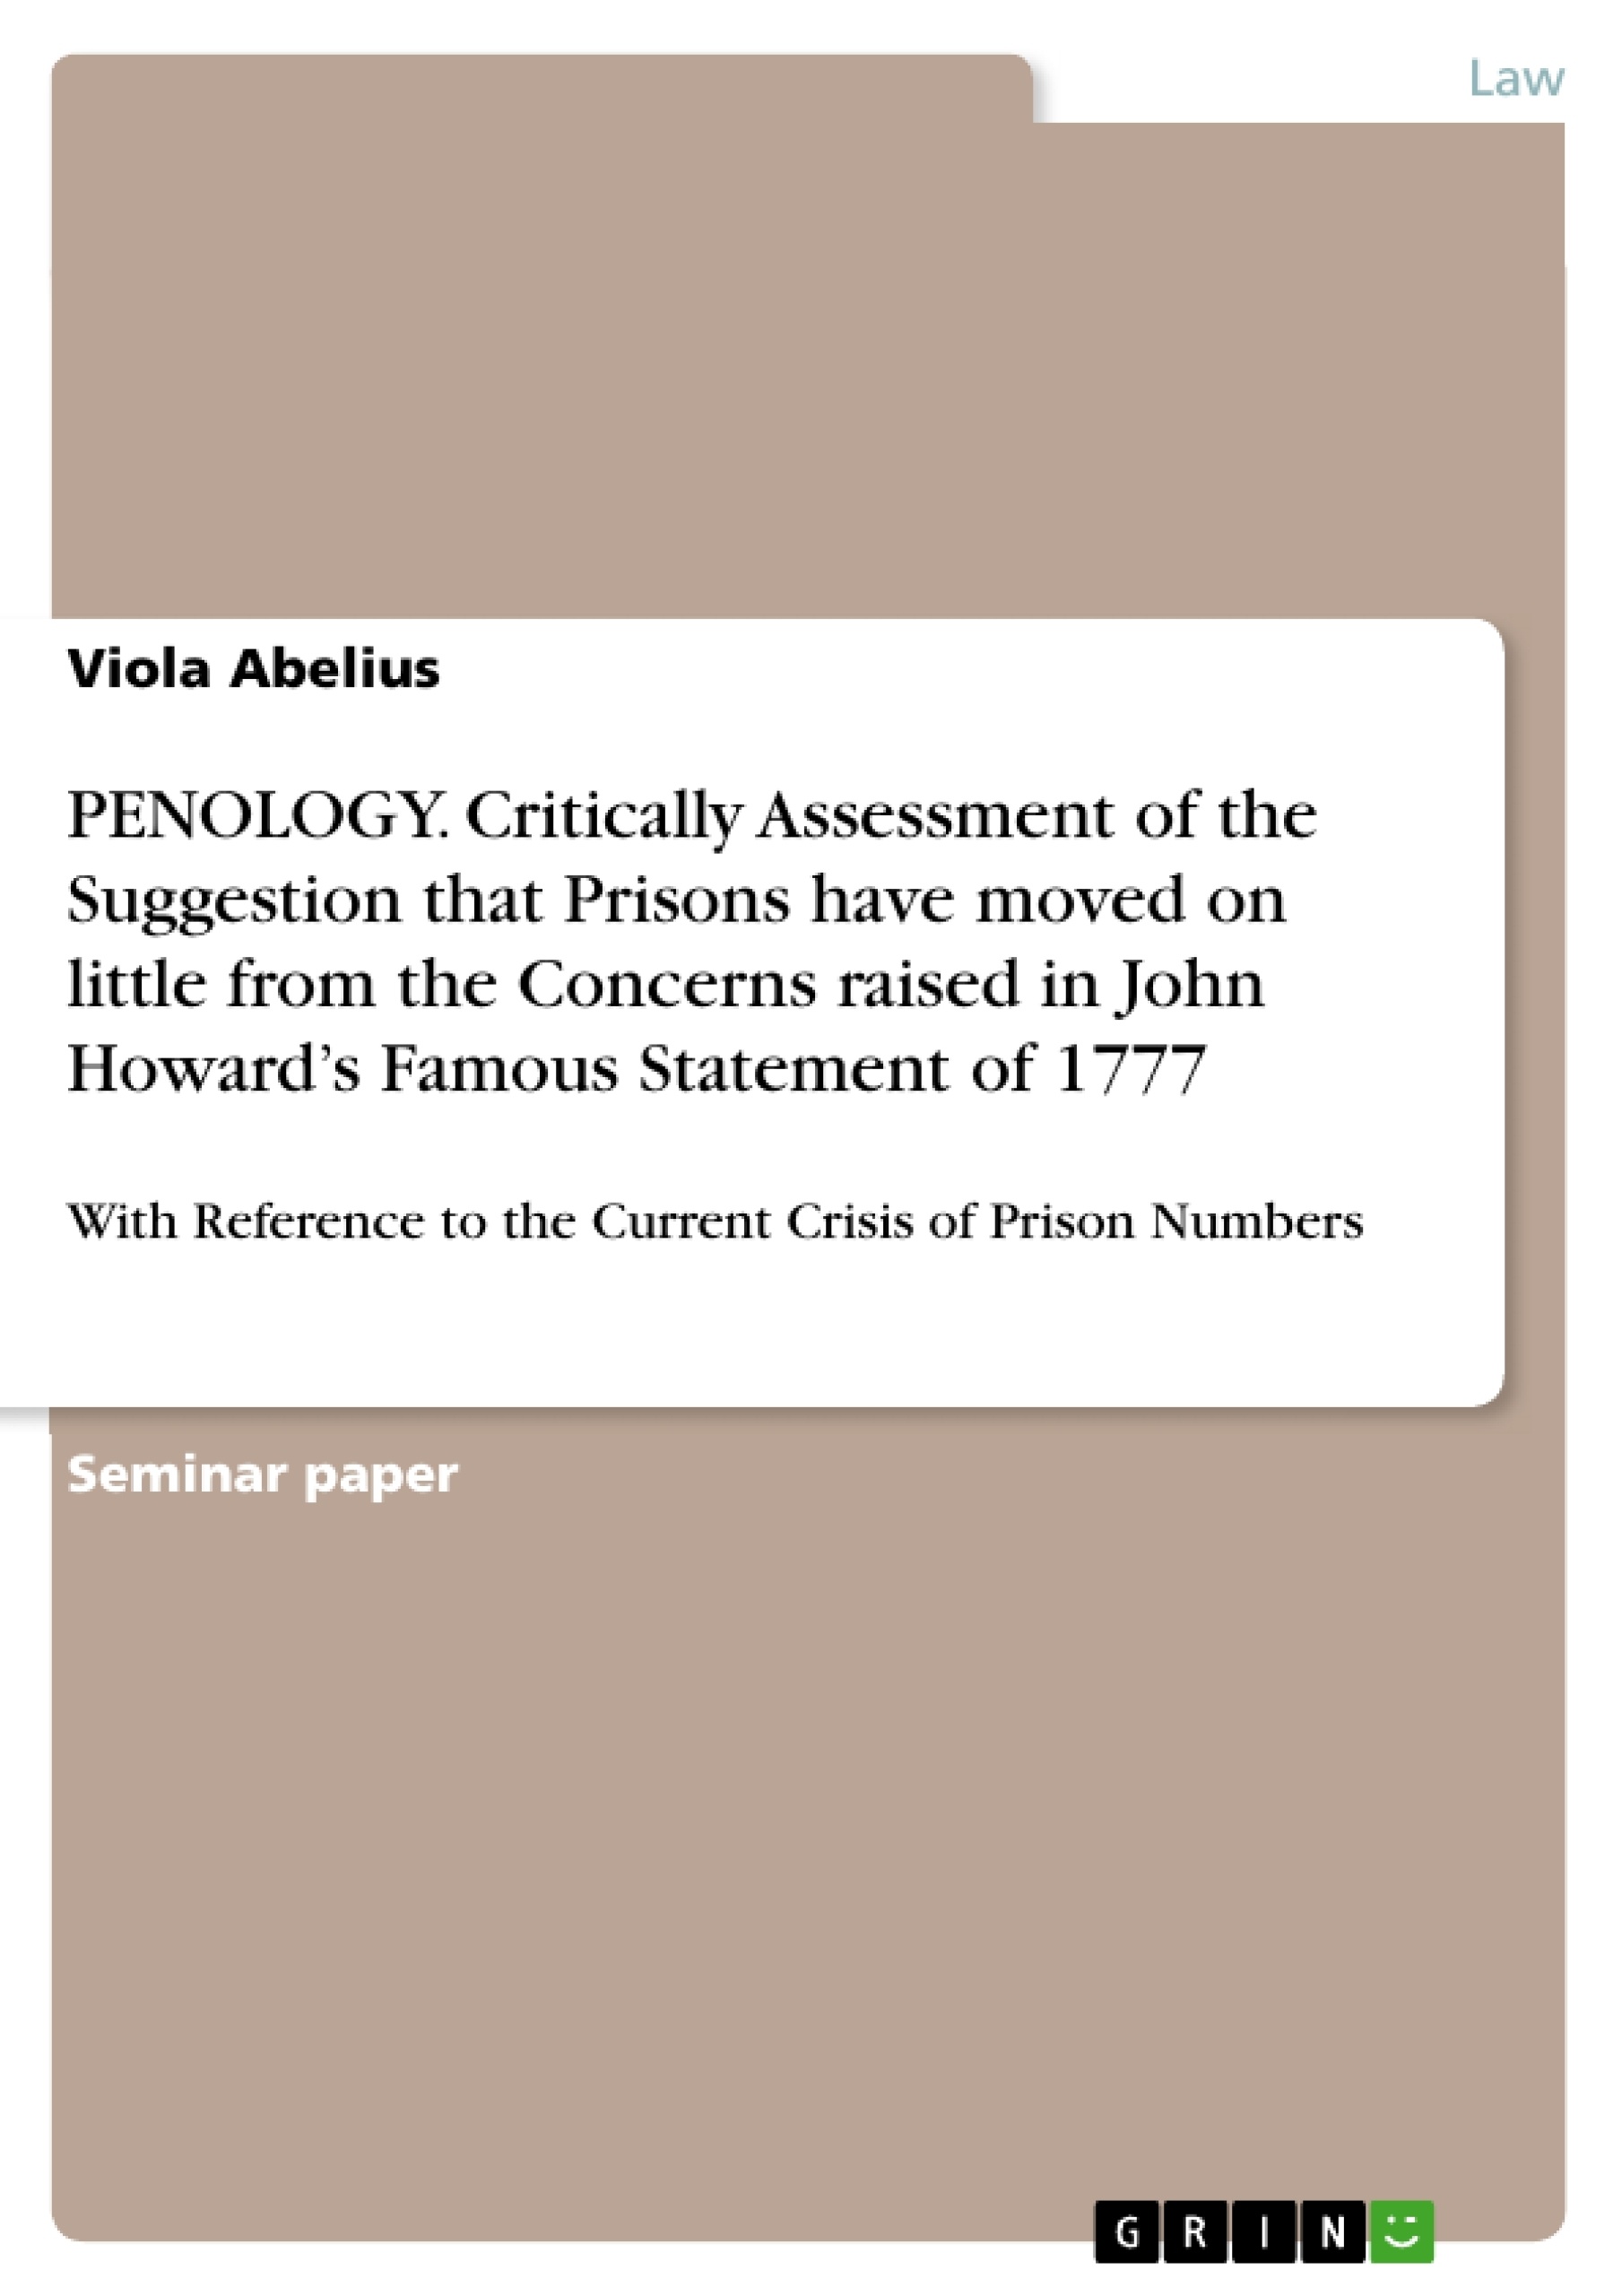 Título: PENOLOGY. Critically Assessment of the Suggestion that Prisons have moved on little from the Concerns raised in John Howard’s Famous Statement of 1777